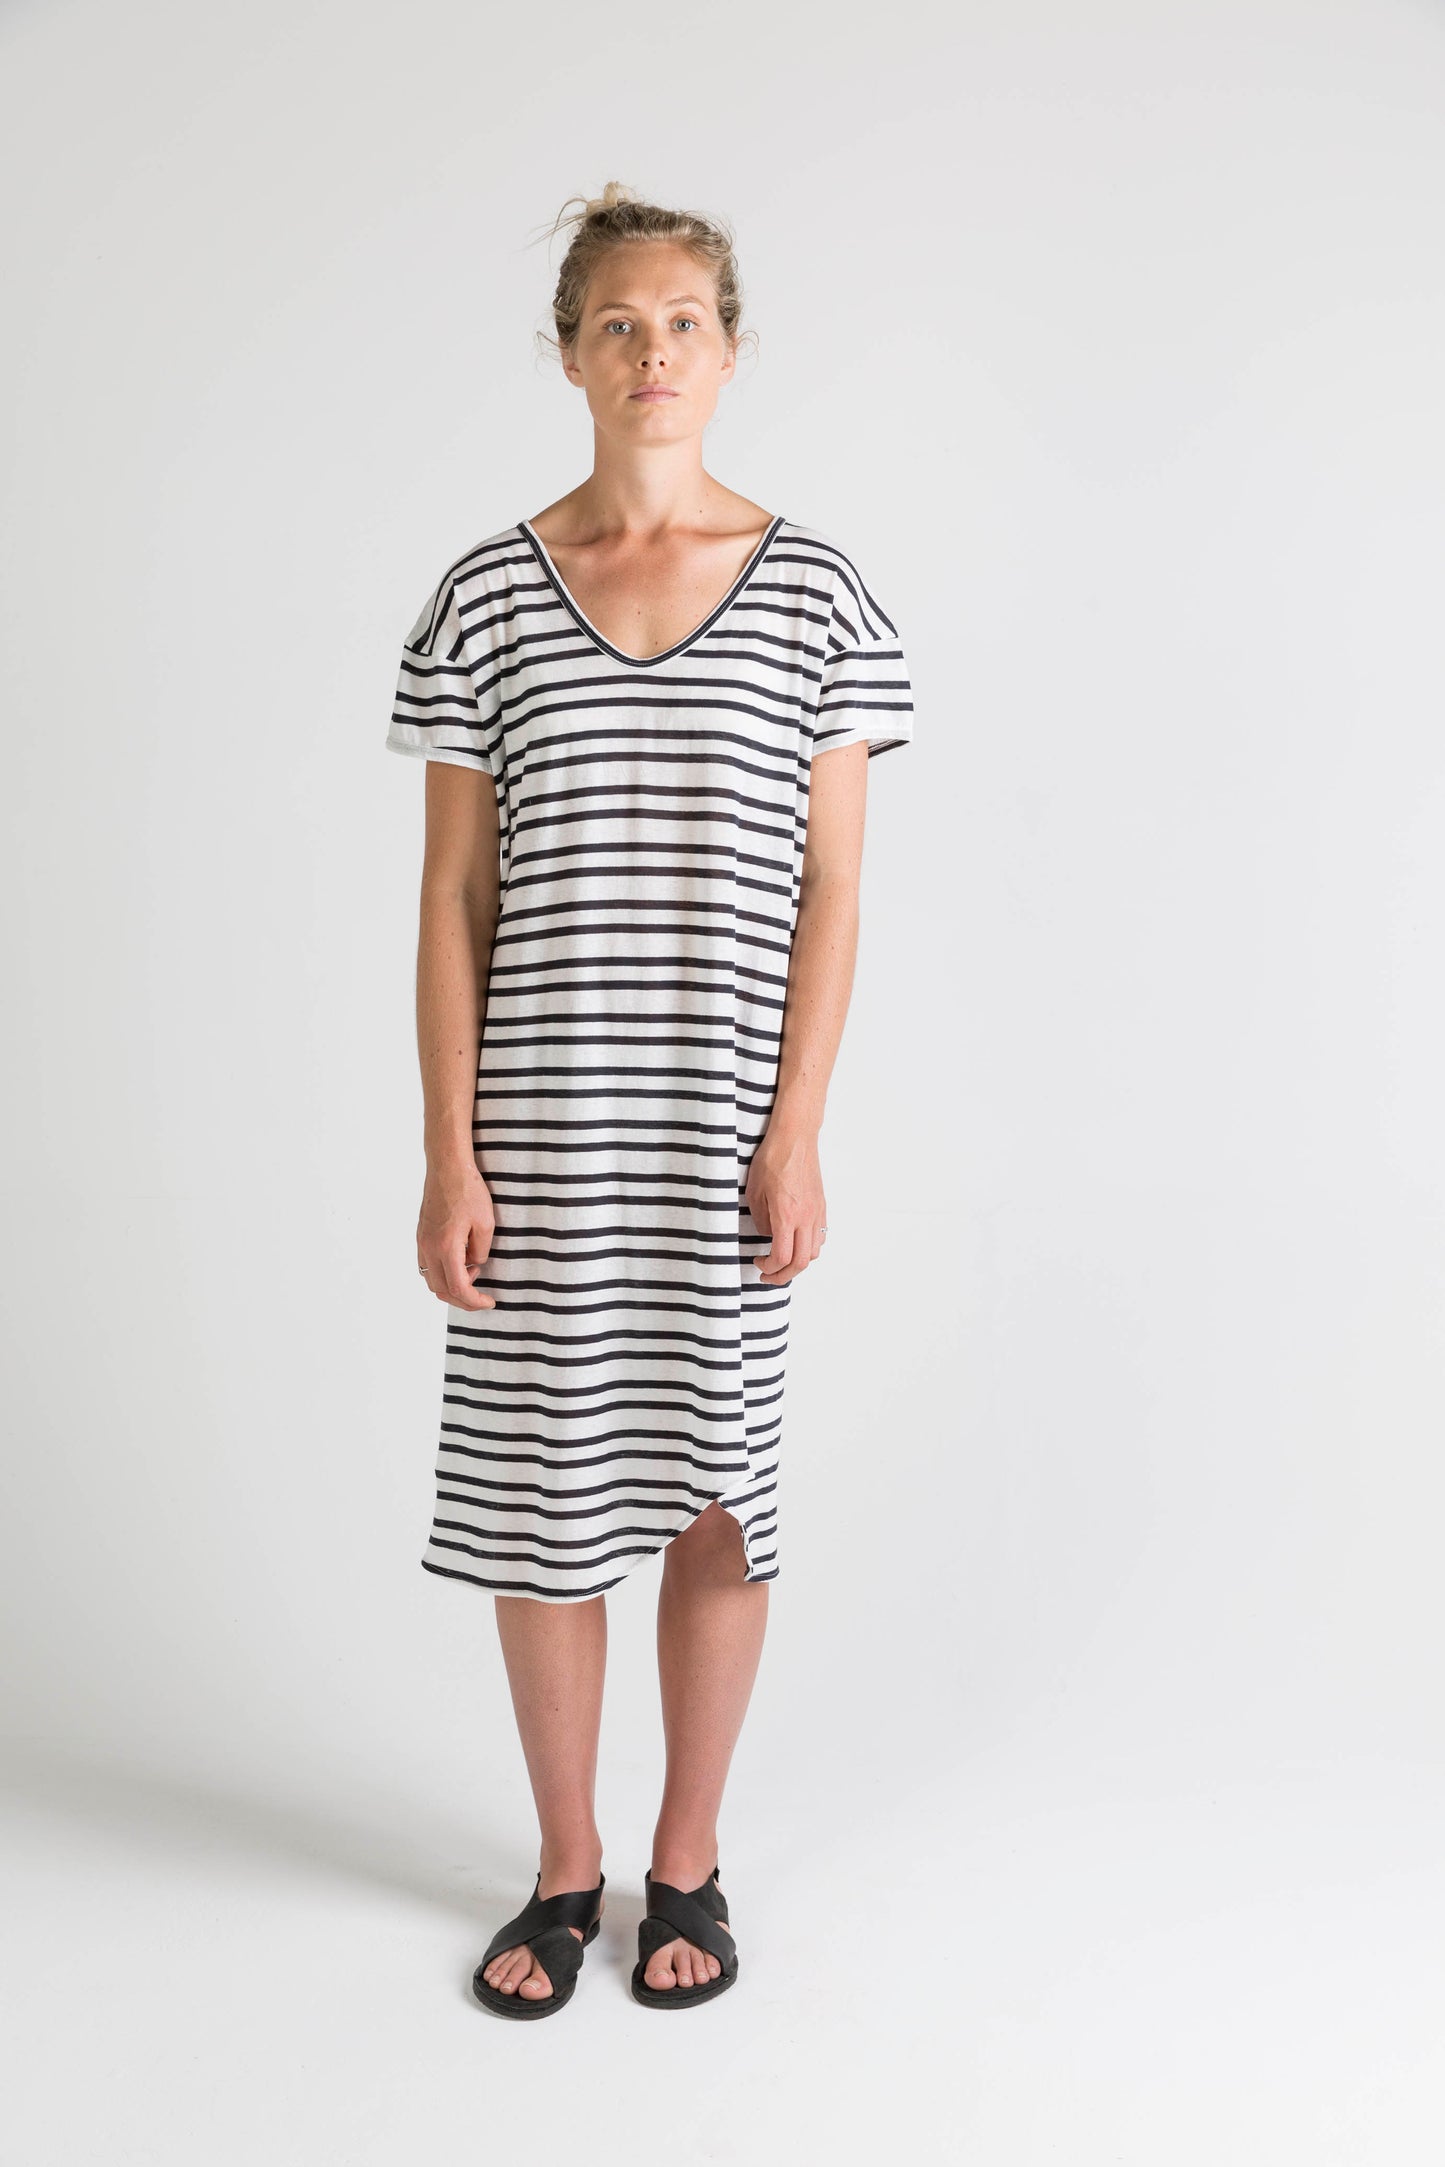 Ophelia and Ryder Scoop Neck Dress